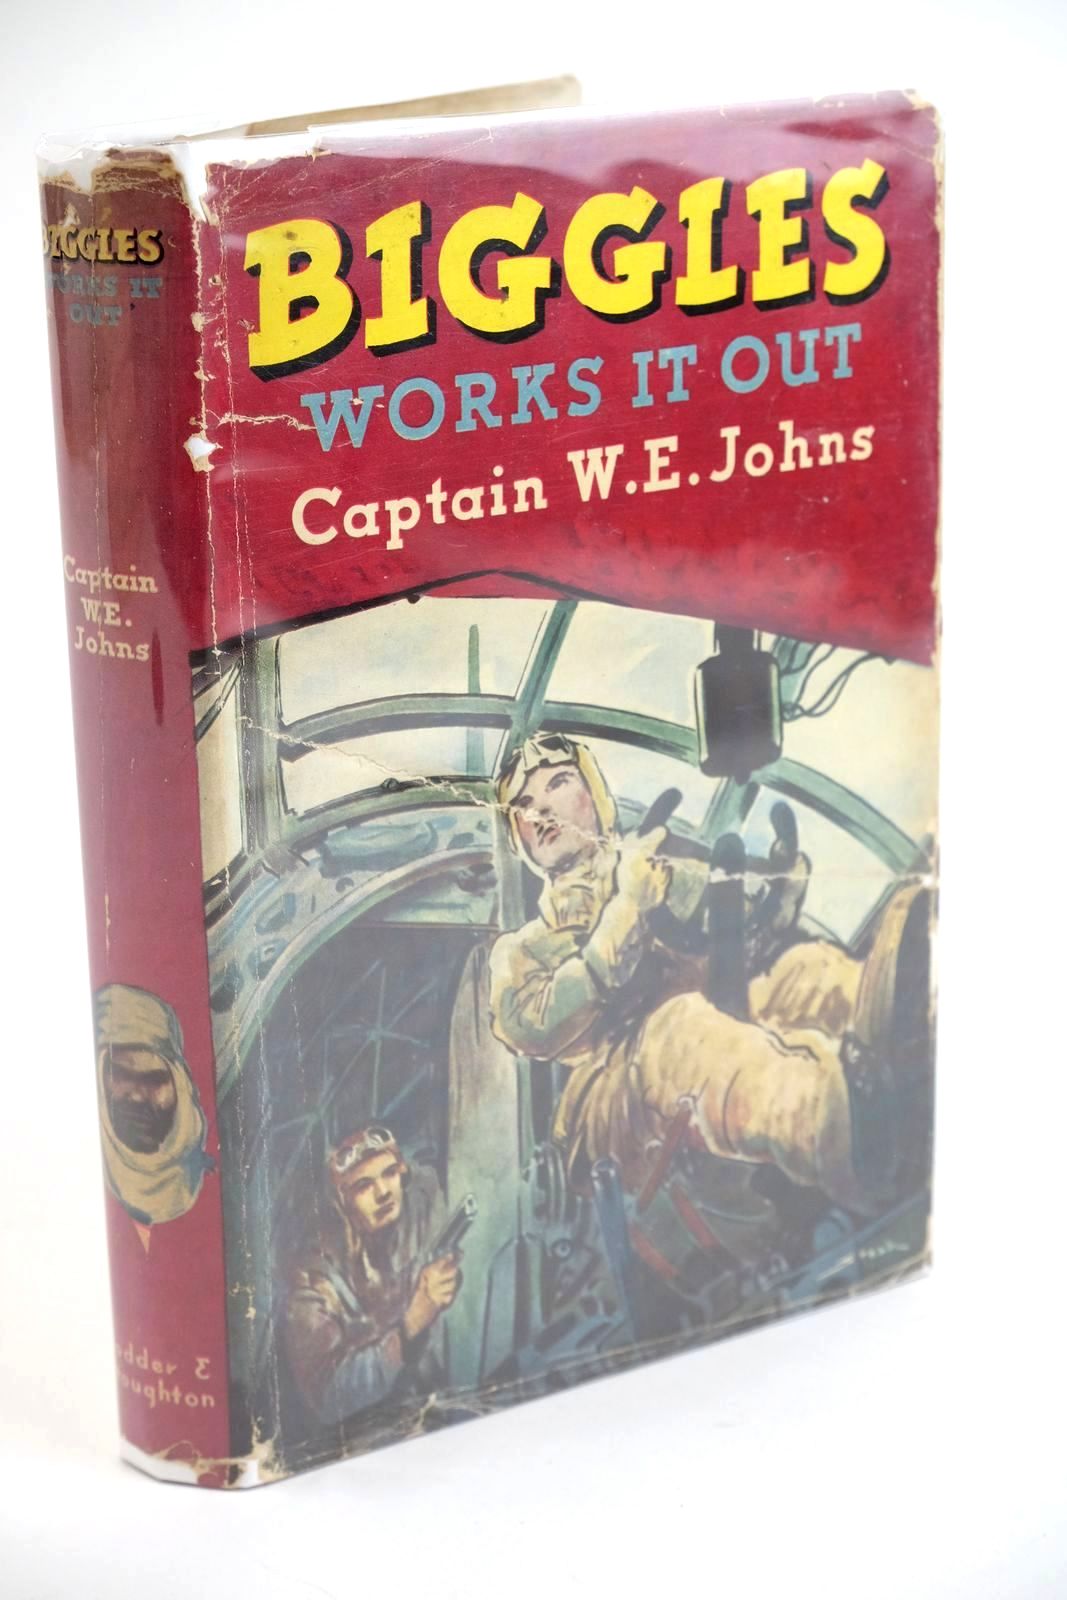 Photo of BIGGLES WORKS IT OUT written by Johns, W.E. illustrated by Stead,  published by Hodder &amp; Stoughton (STOCK CODE: 1323425)  for sale by Stella & Rose's Books